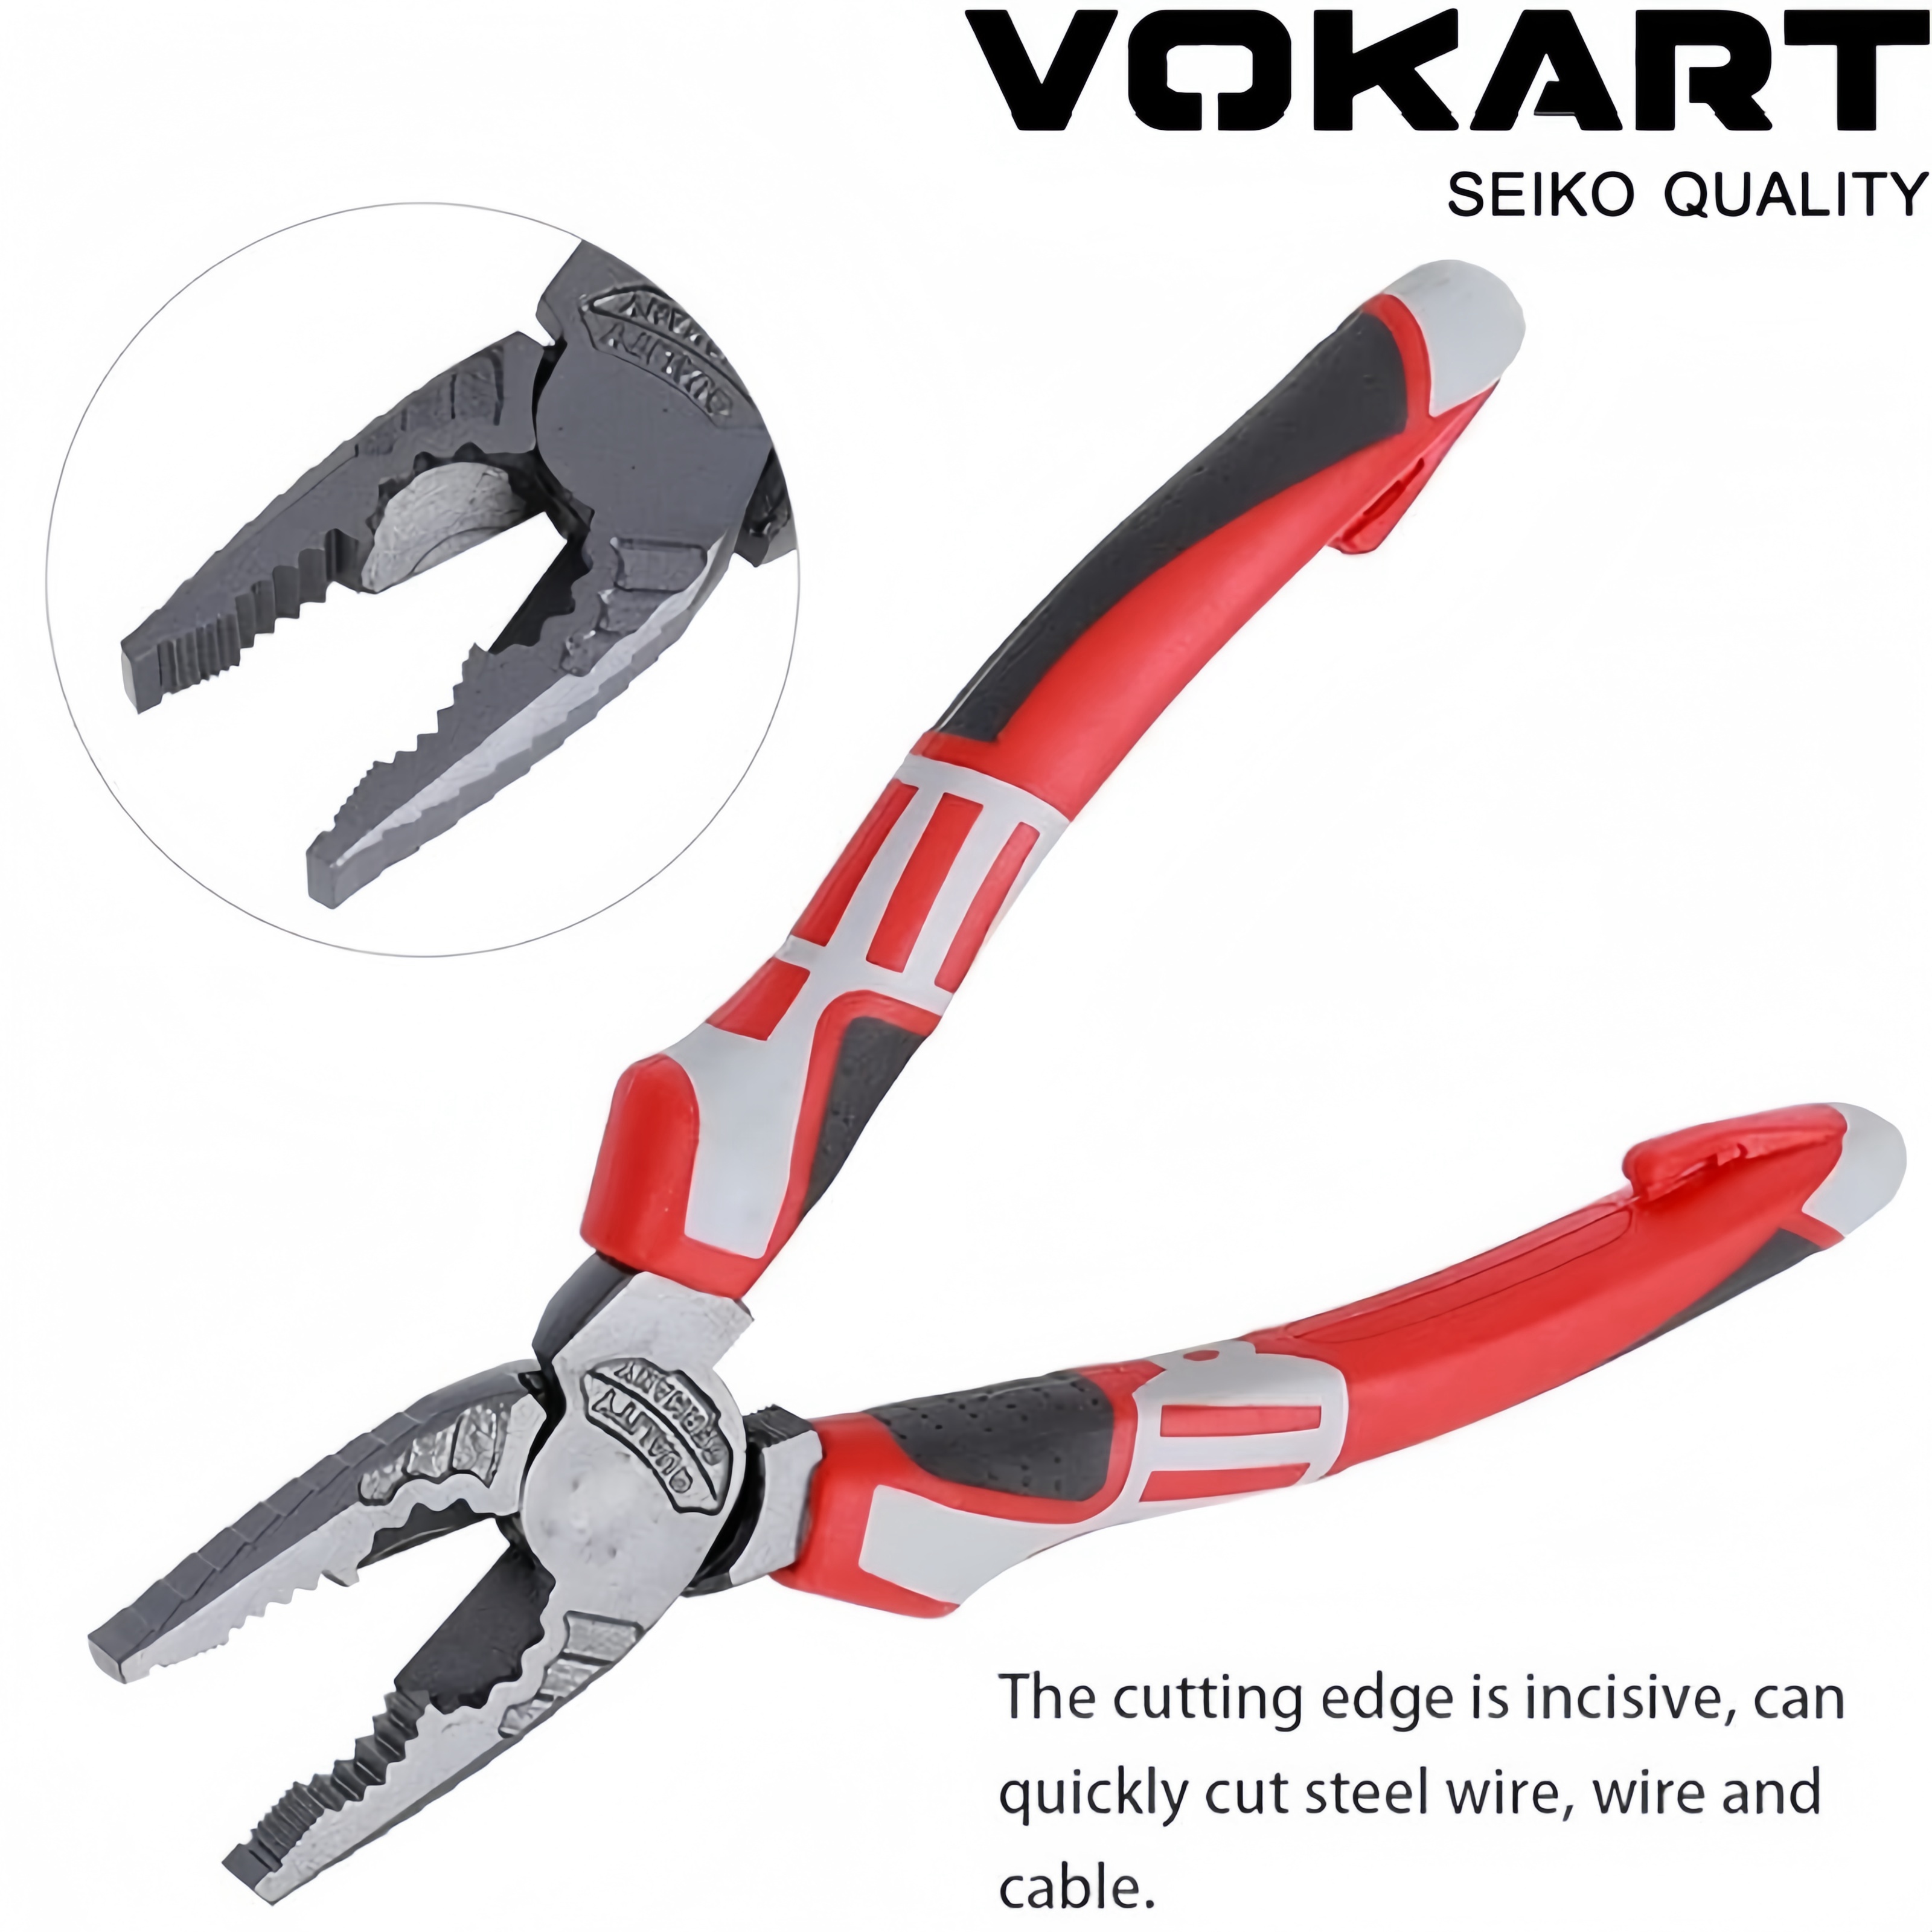 

Vokart Multi-functional German Electrician Pliers: Wire Stripper, Cable Cutters, Bench Vice, Plier Head, Teflon Coated Finish, Crv Material - Suitable For Electrical Professionals And Household Use